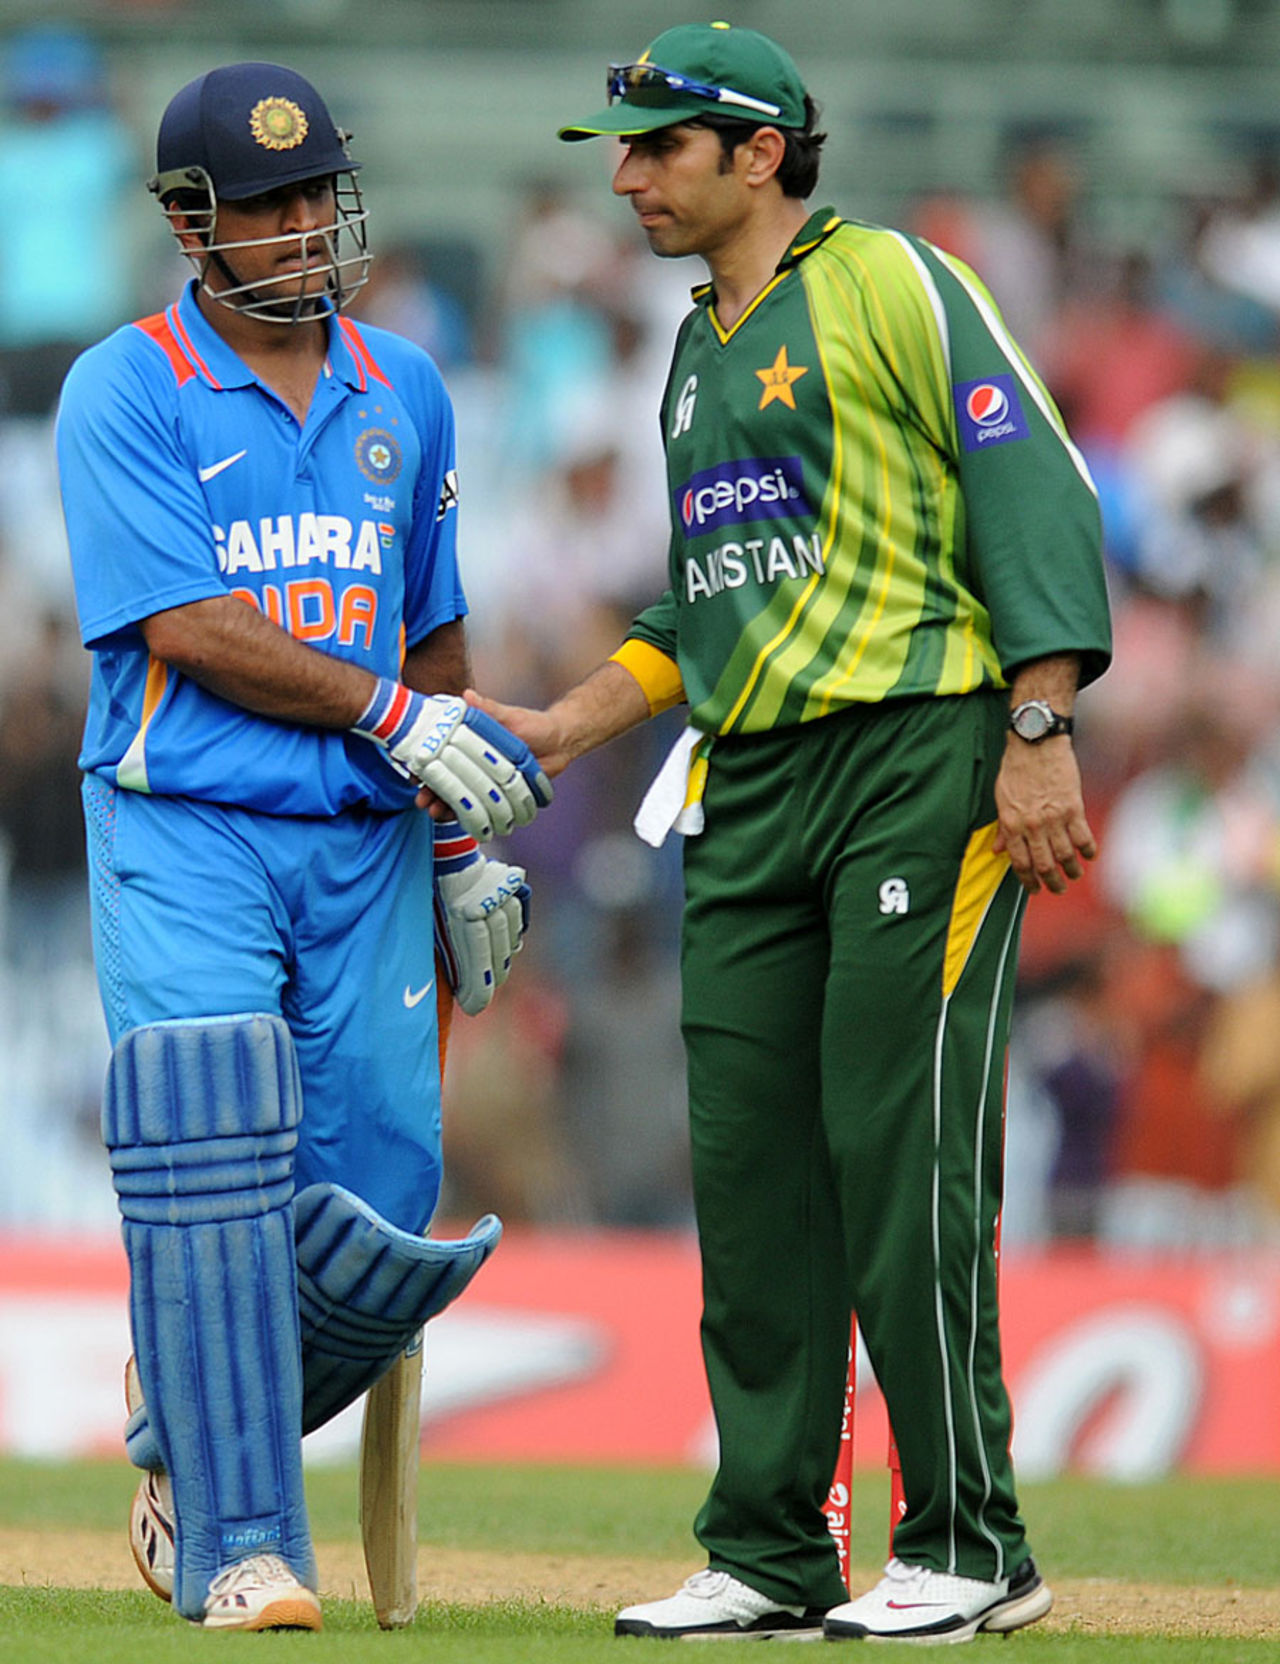 MS Dhoni is congratulated by Misbah-ul-Haq after his knock of 113, India v Pakistan, 1st ODI, Chennai, December 30, 2012